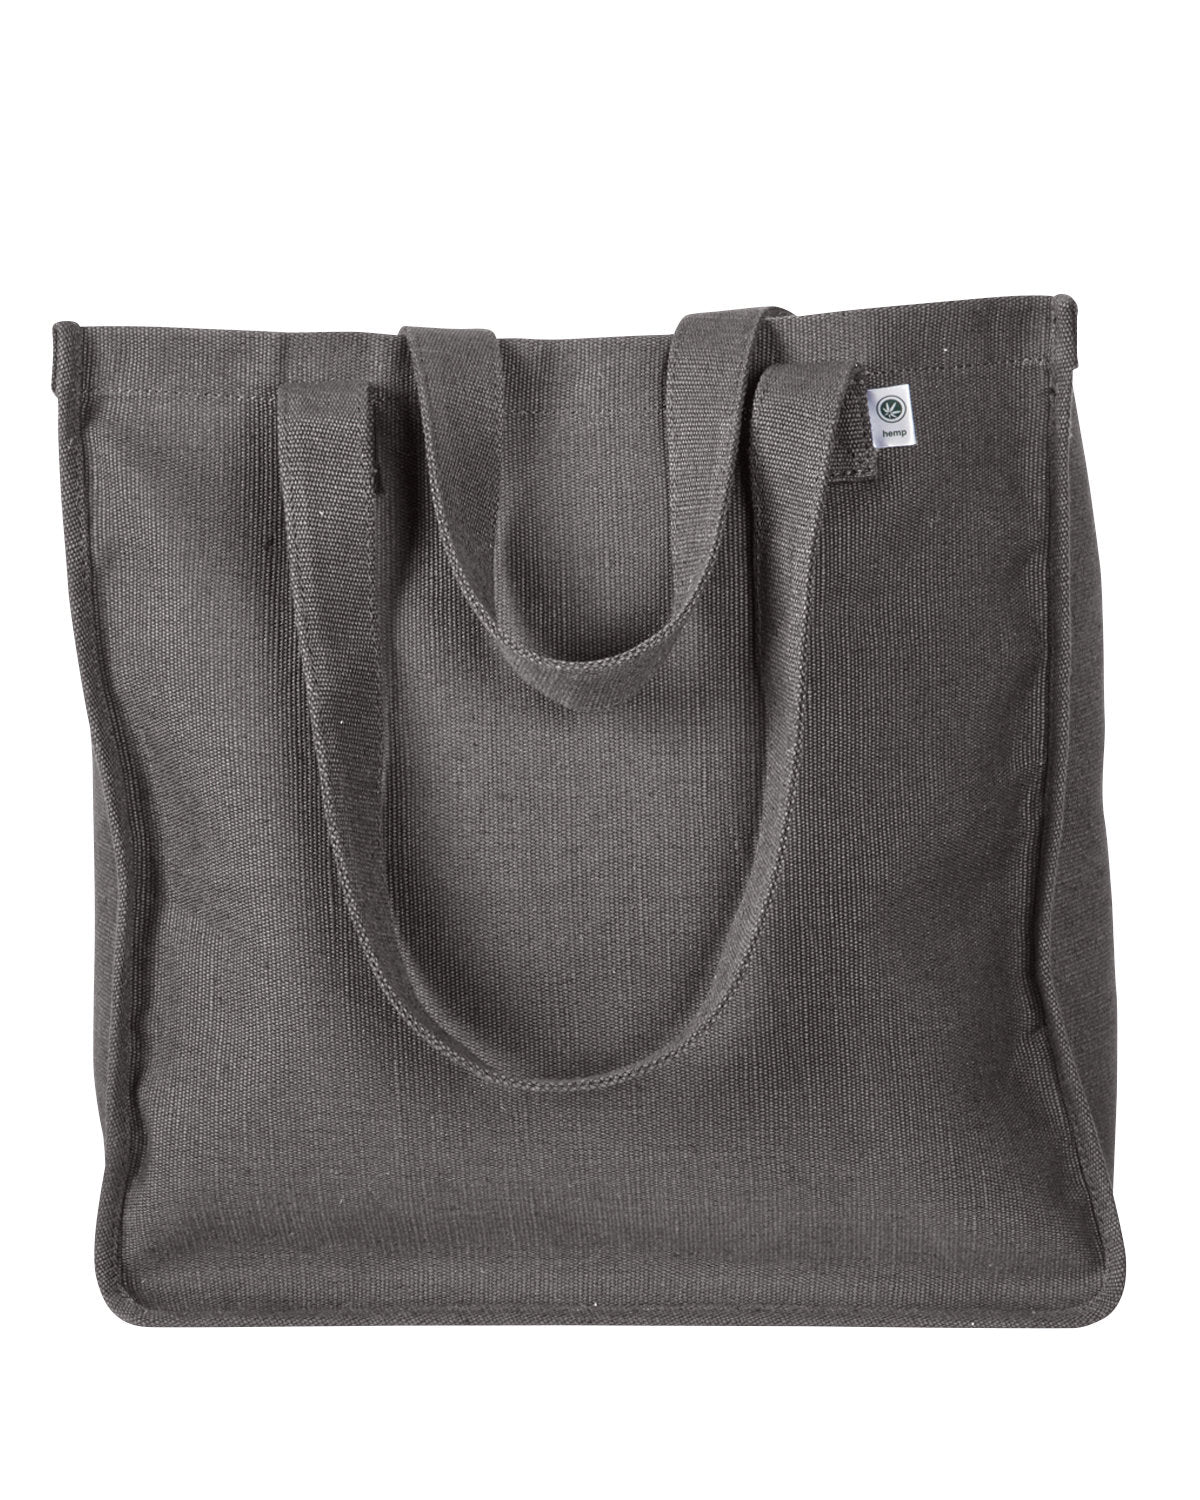 Bags and Accessories CHARCOAL OS econscious